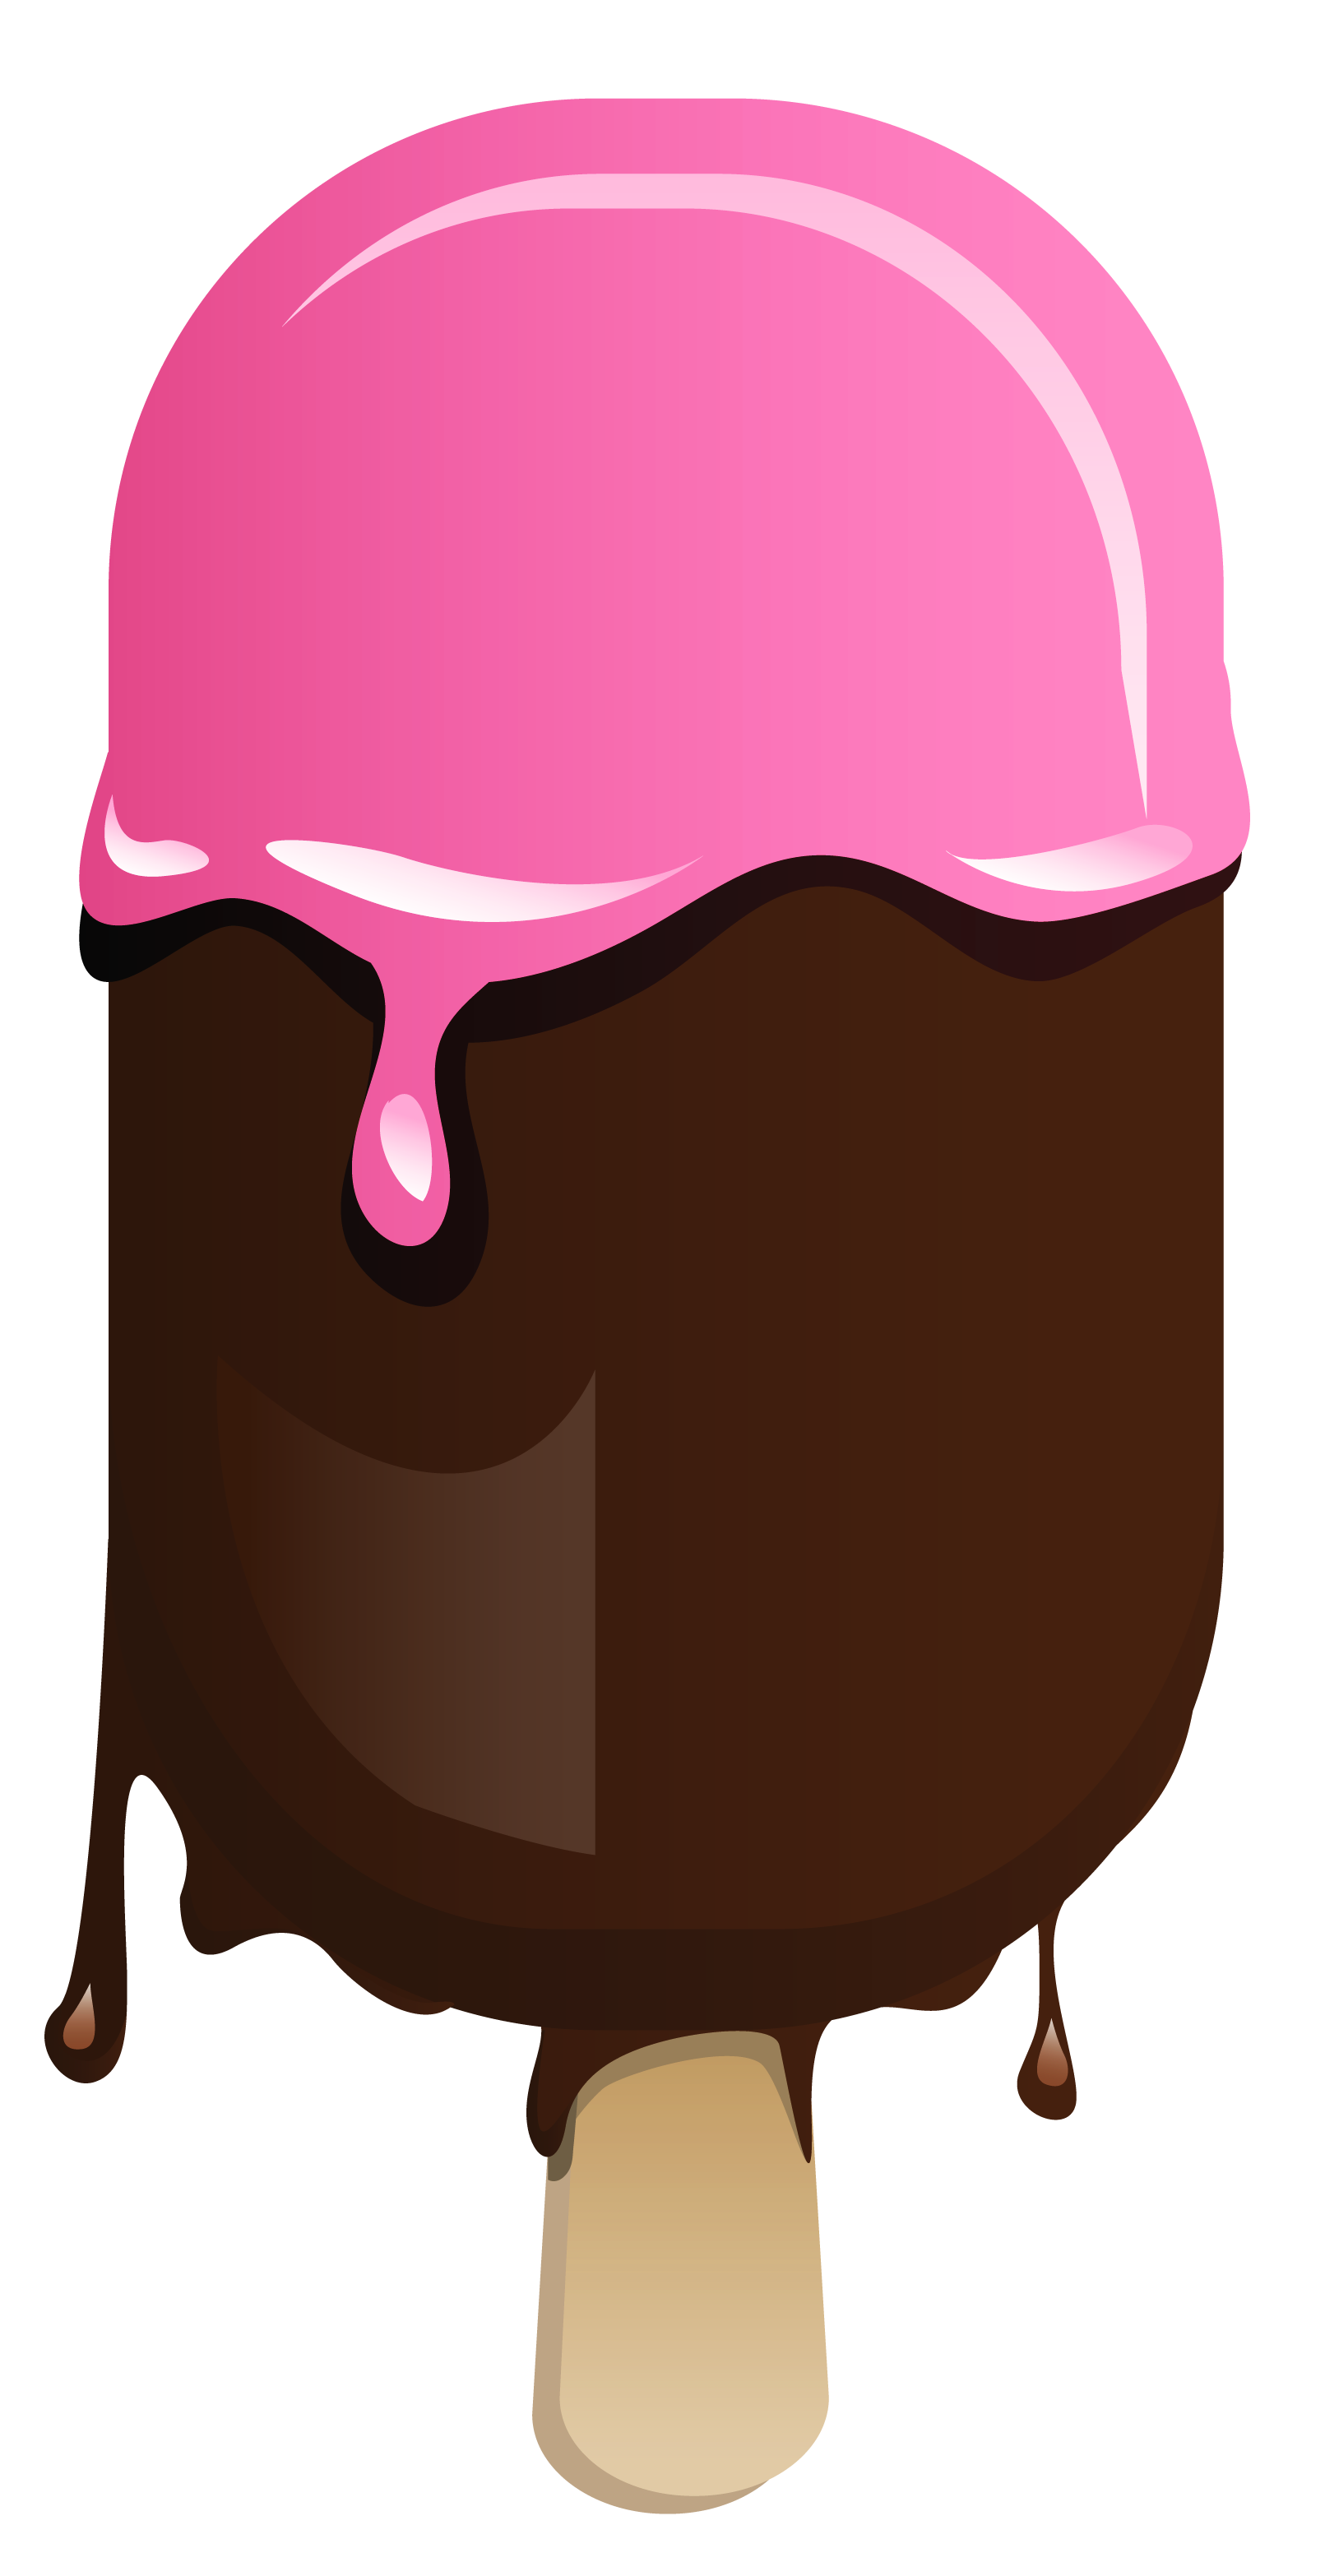 Ice cream clip art free download free clipart images - dbclipart.com